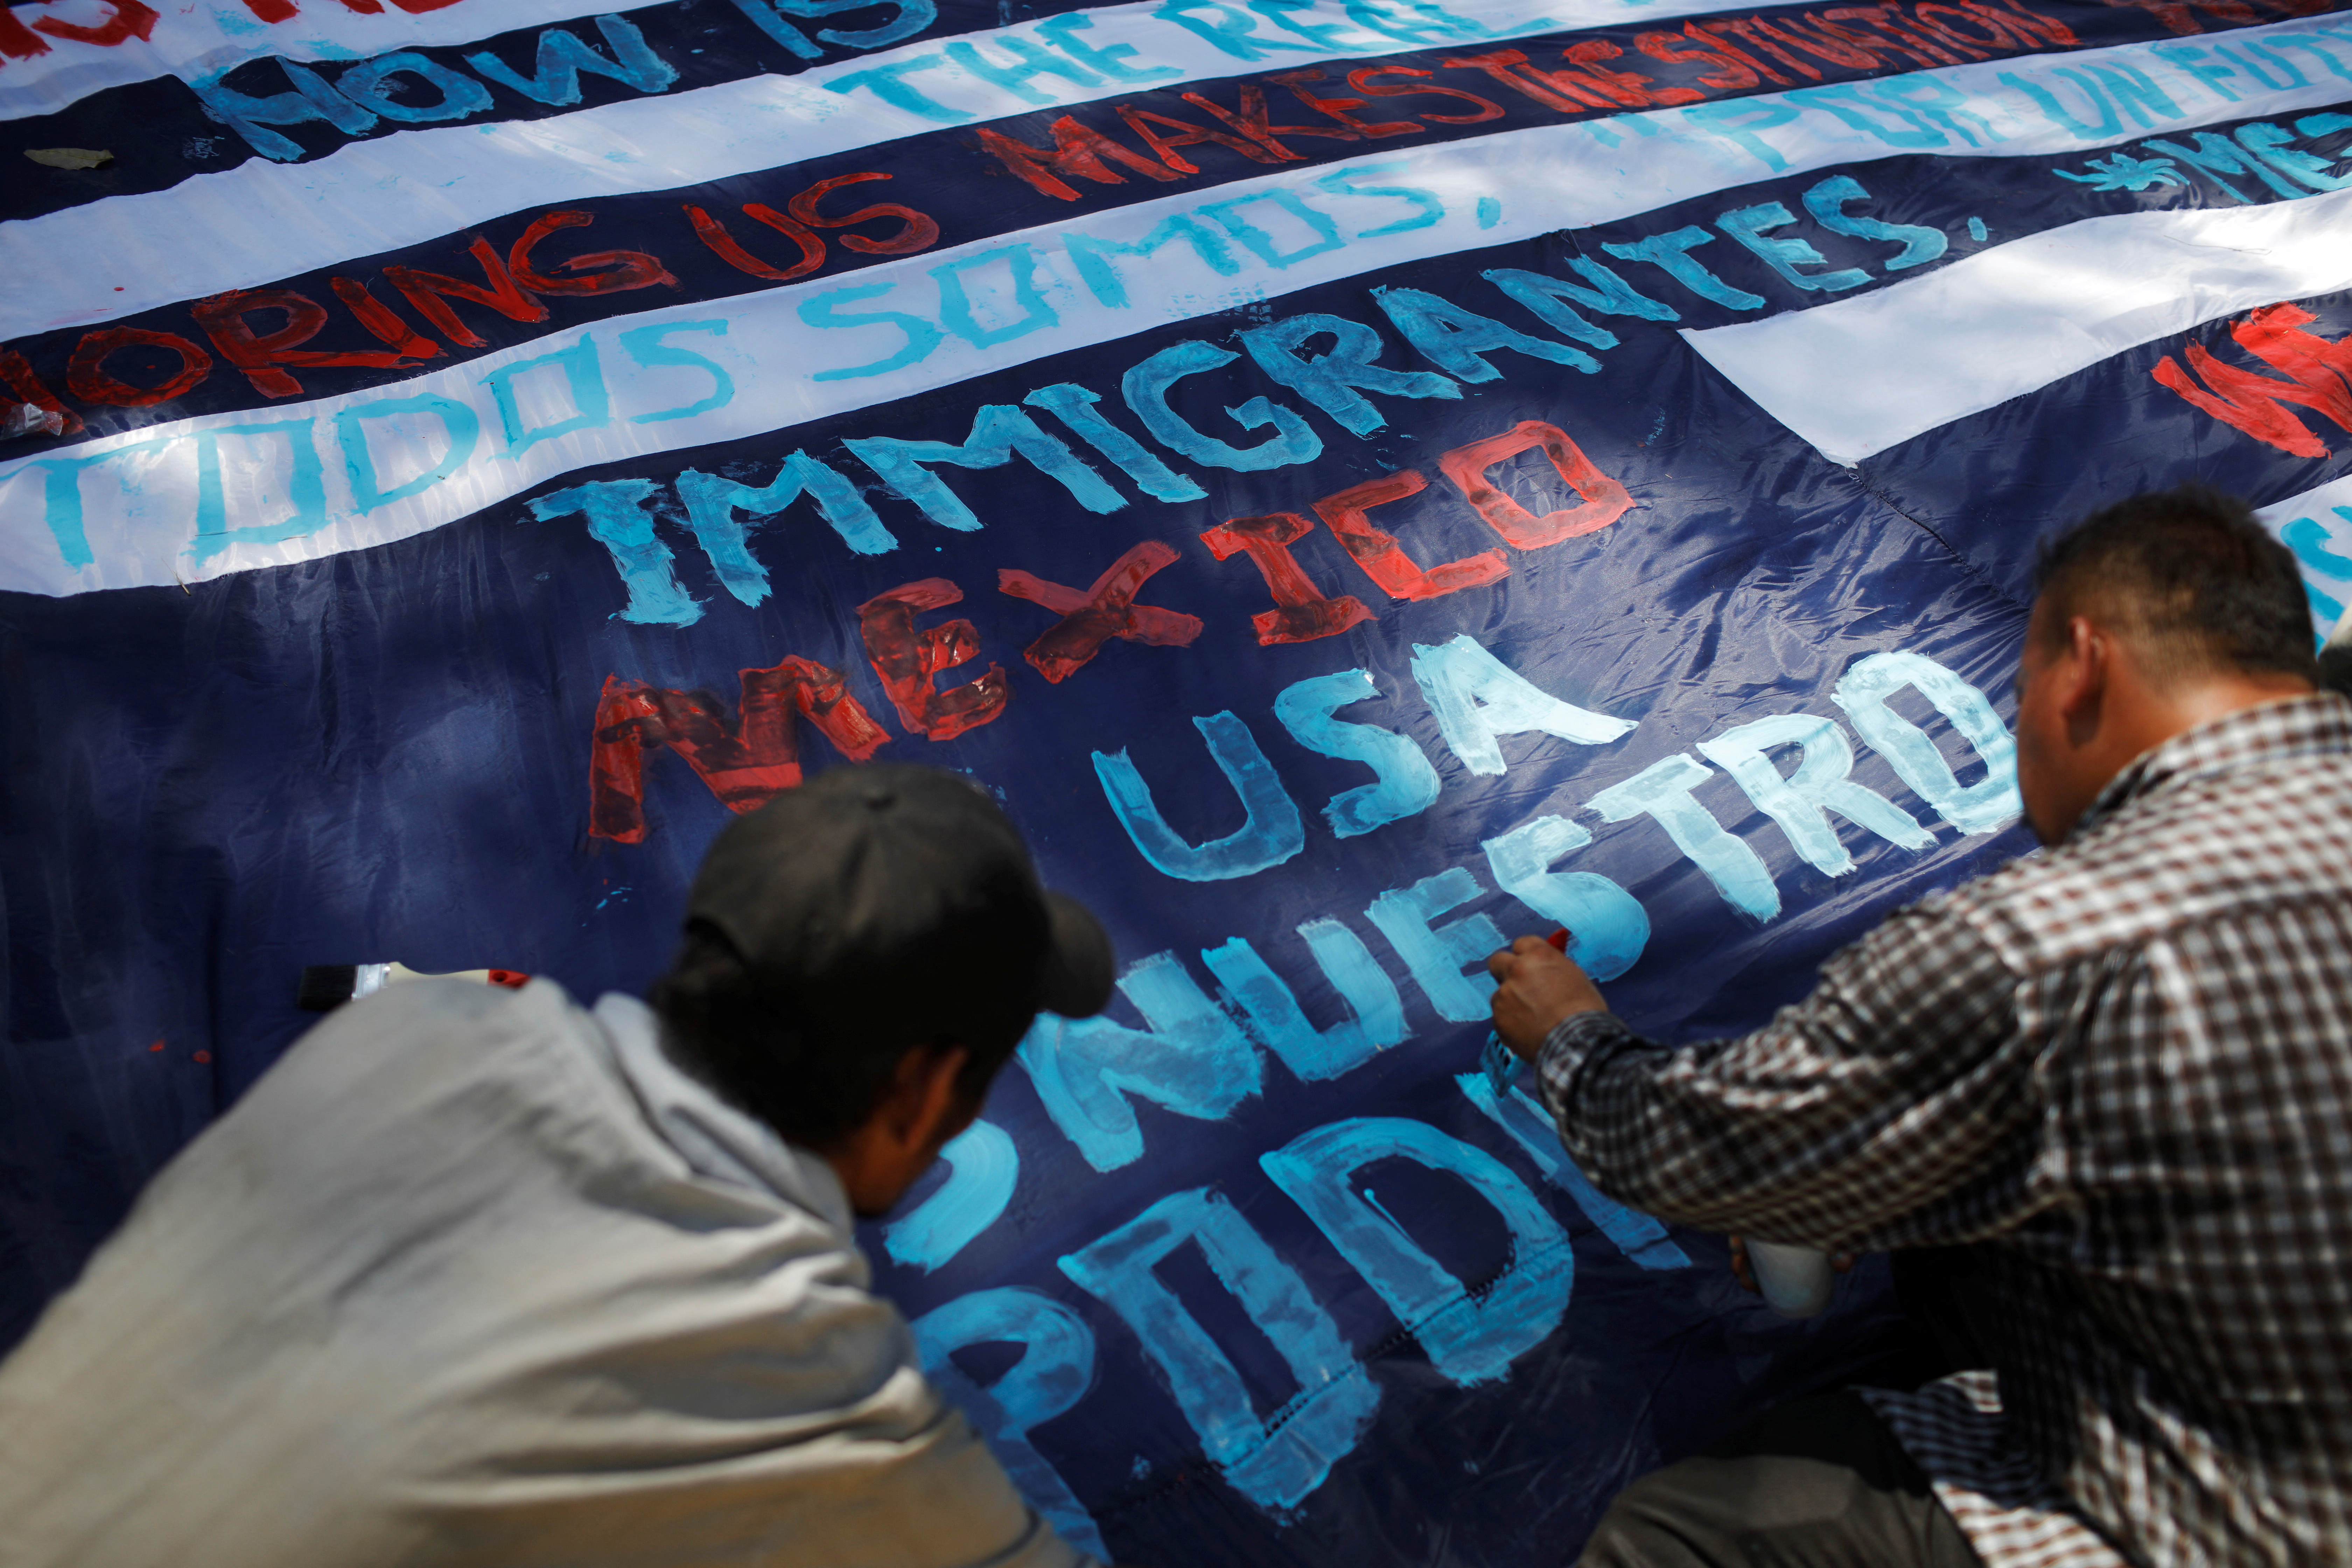 Migrants travelling to the U.S. paint a banner in an improvised shelter in Tecun Uman